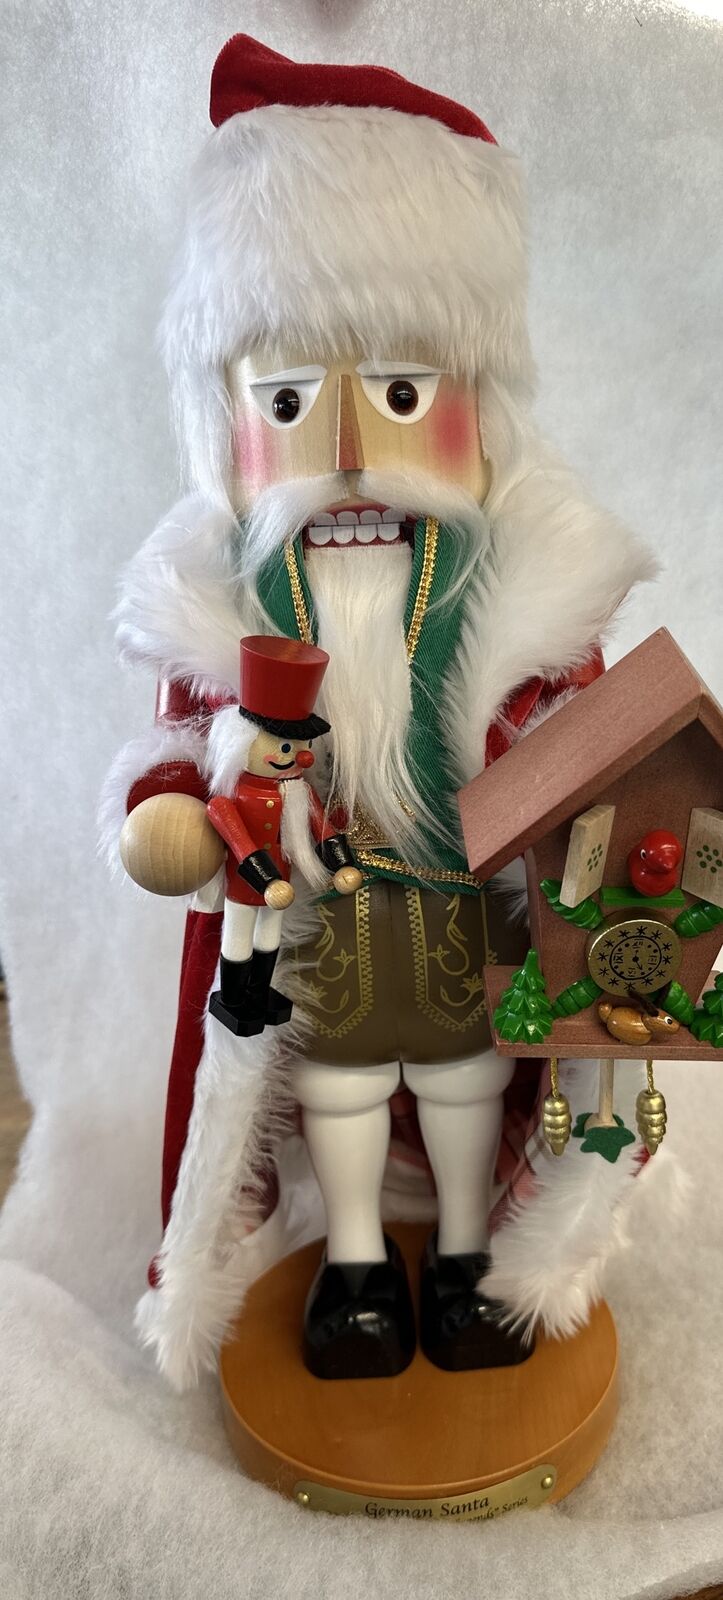 STEINBACH GERMAN SANTA 22ND In The “CHRISTMAS LEGENDS” Series  18inch Tall